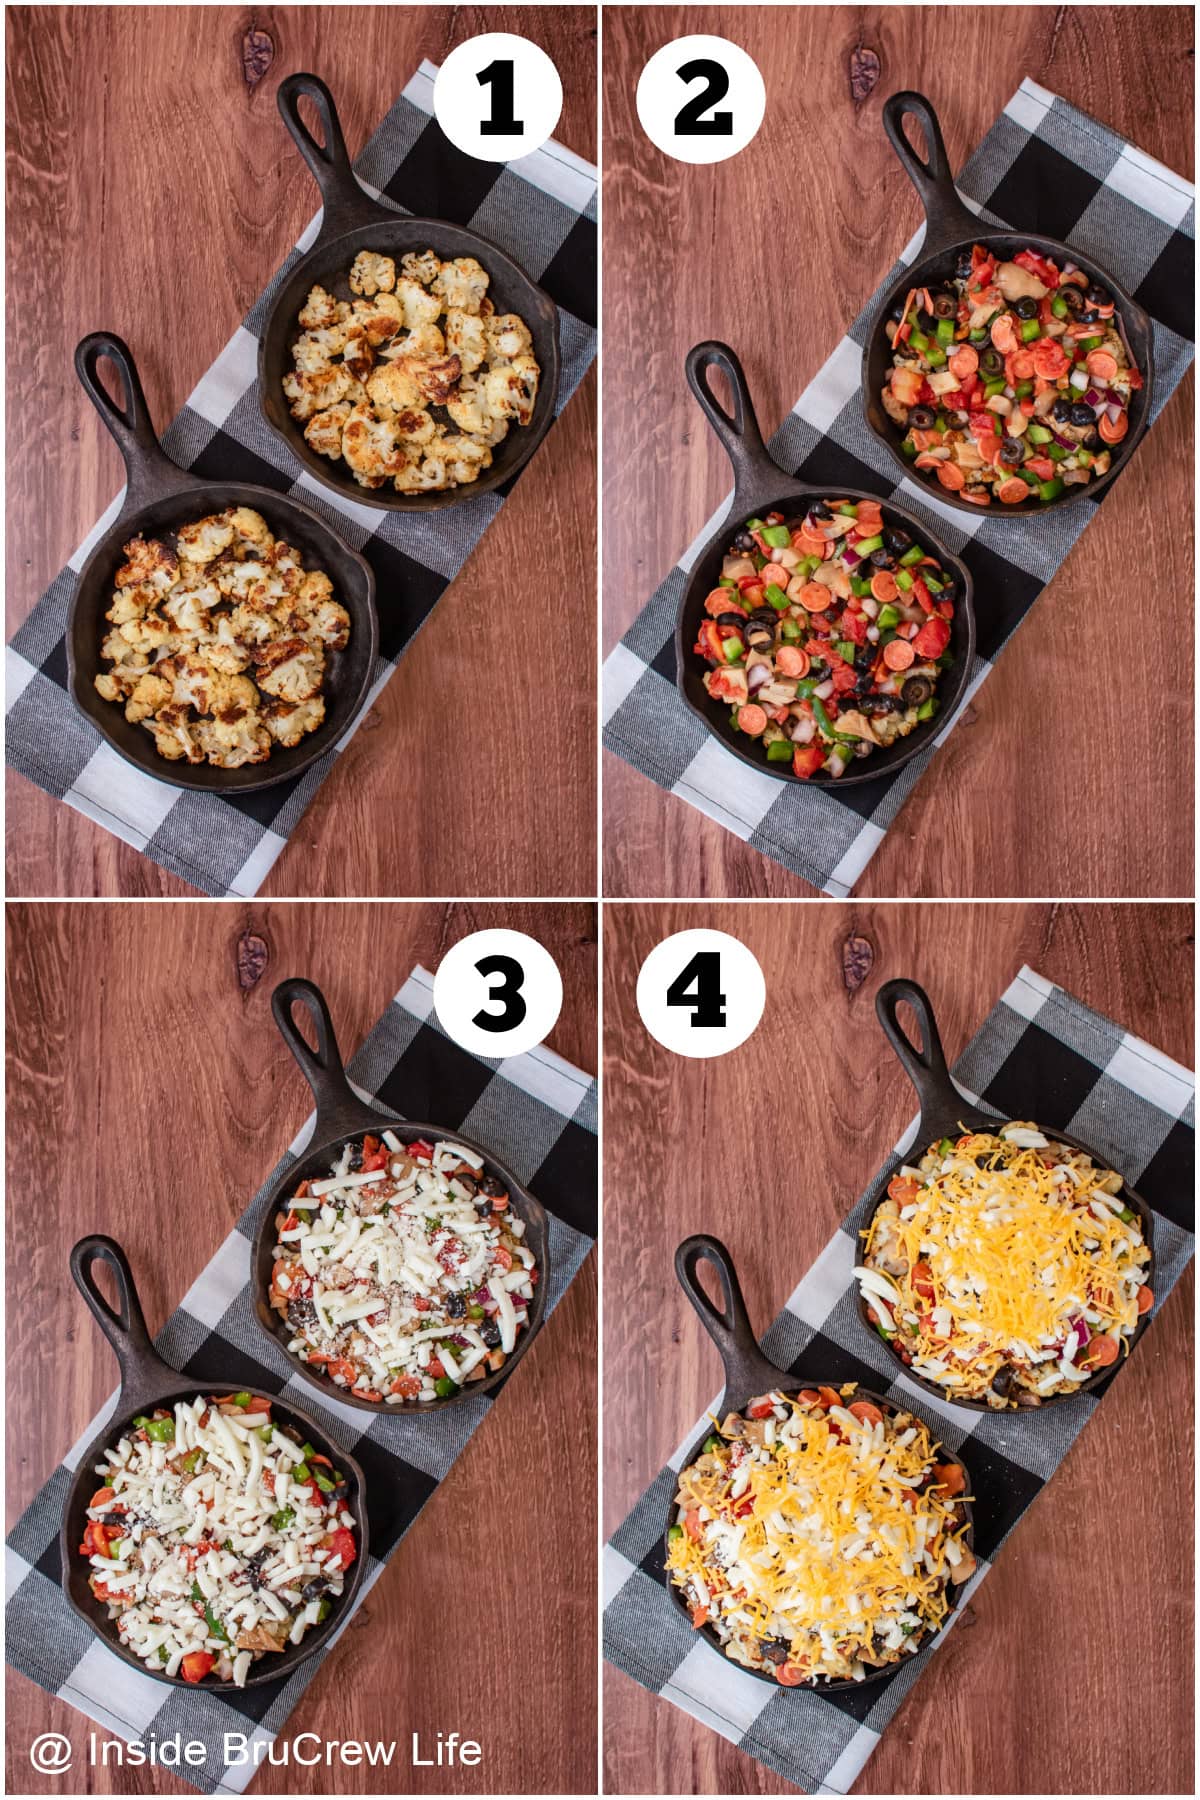 Four pictures collaged together showing how to assemble nachos made with cauliflower.